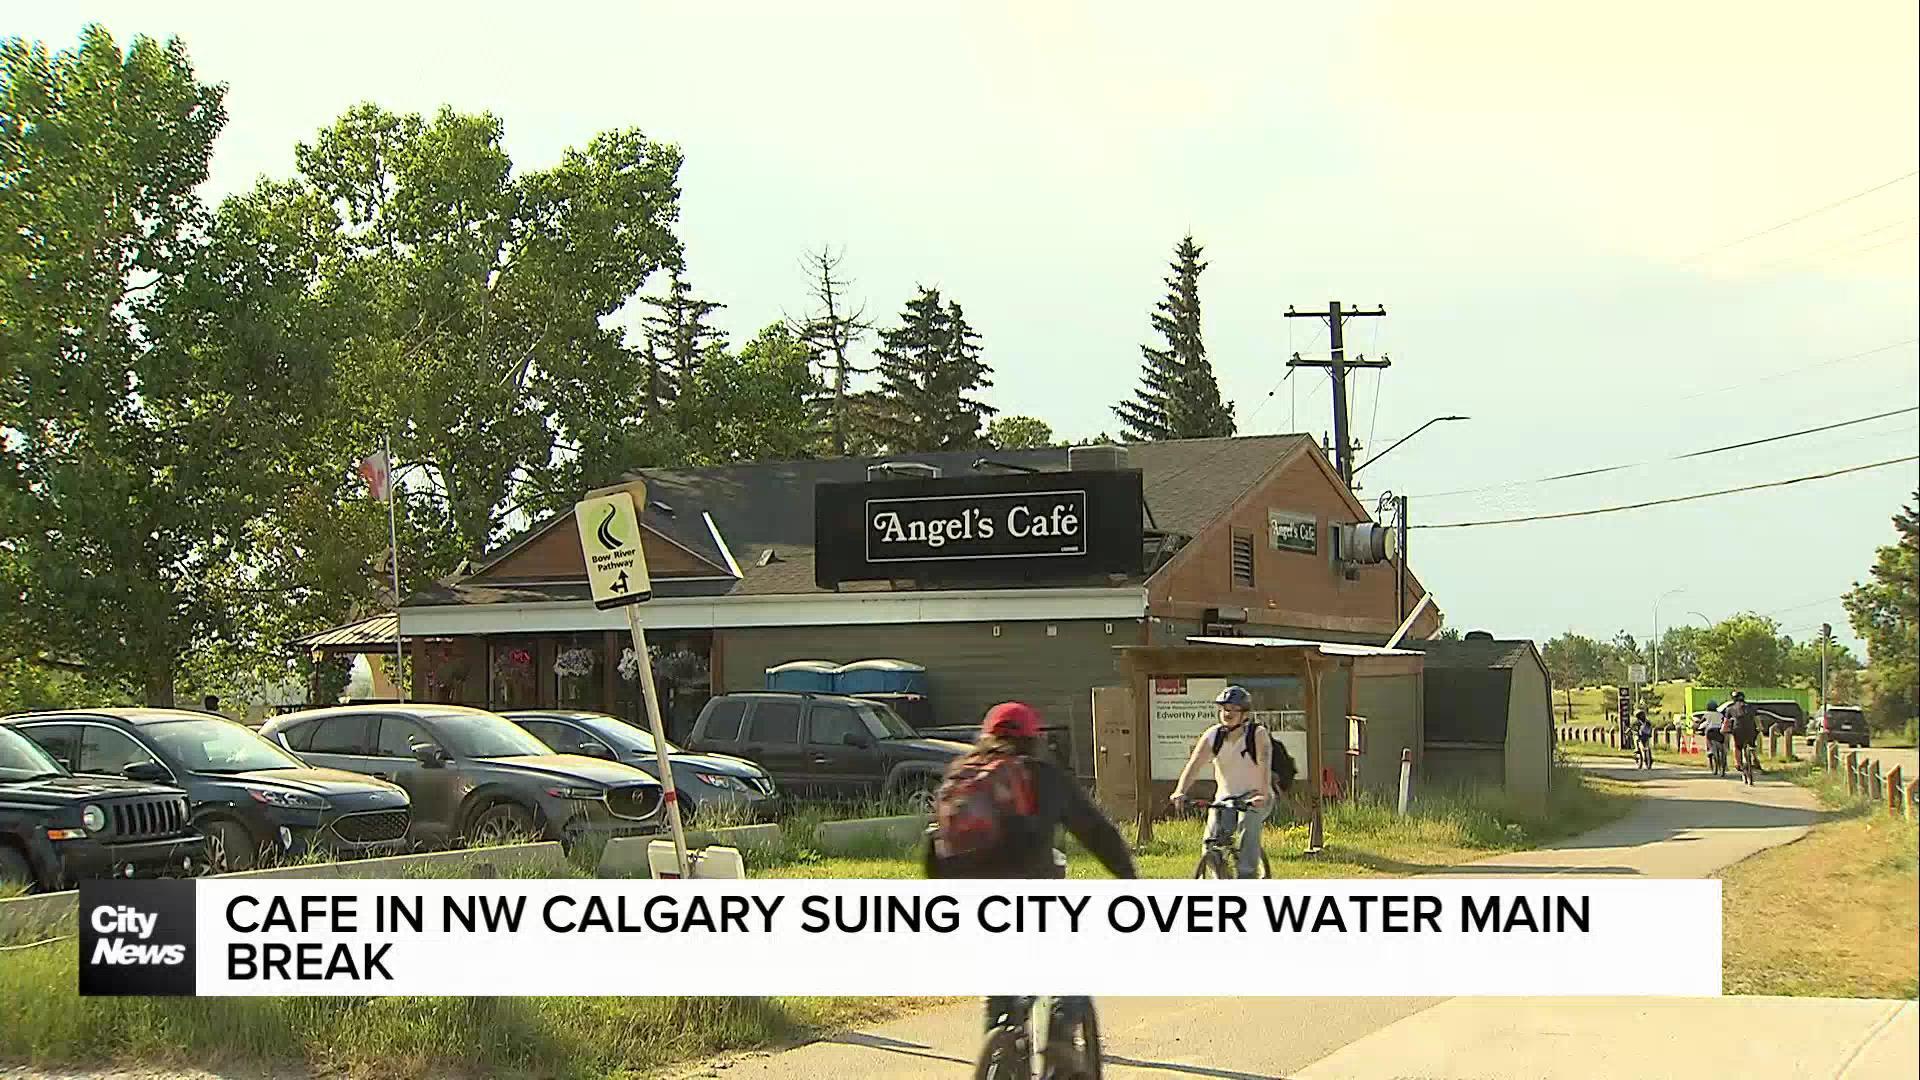 Cafe in NW Calgary suing city over water main break